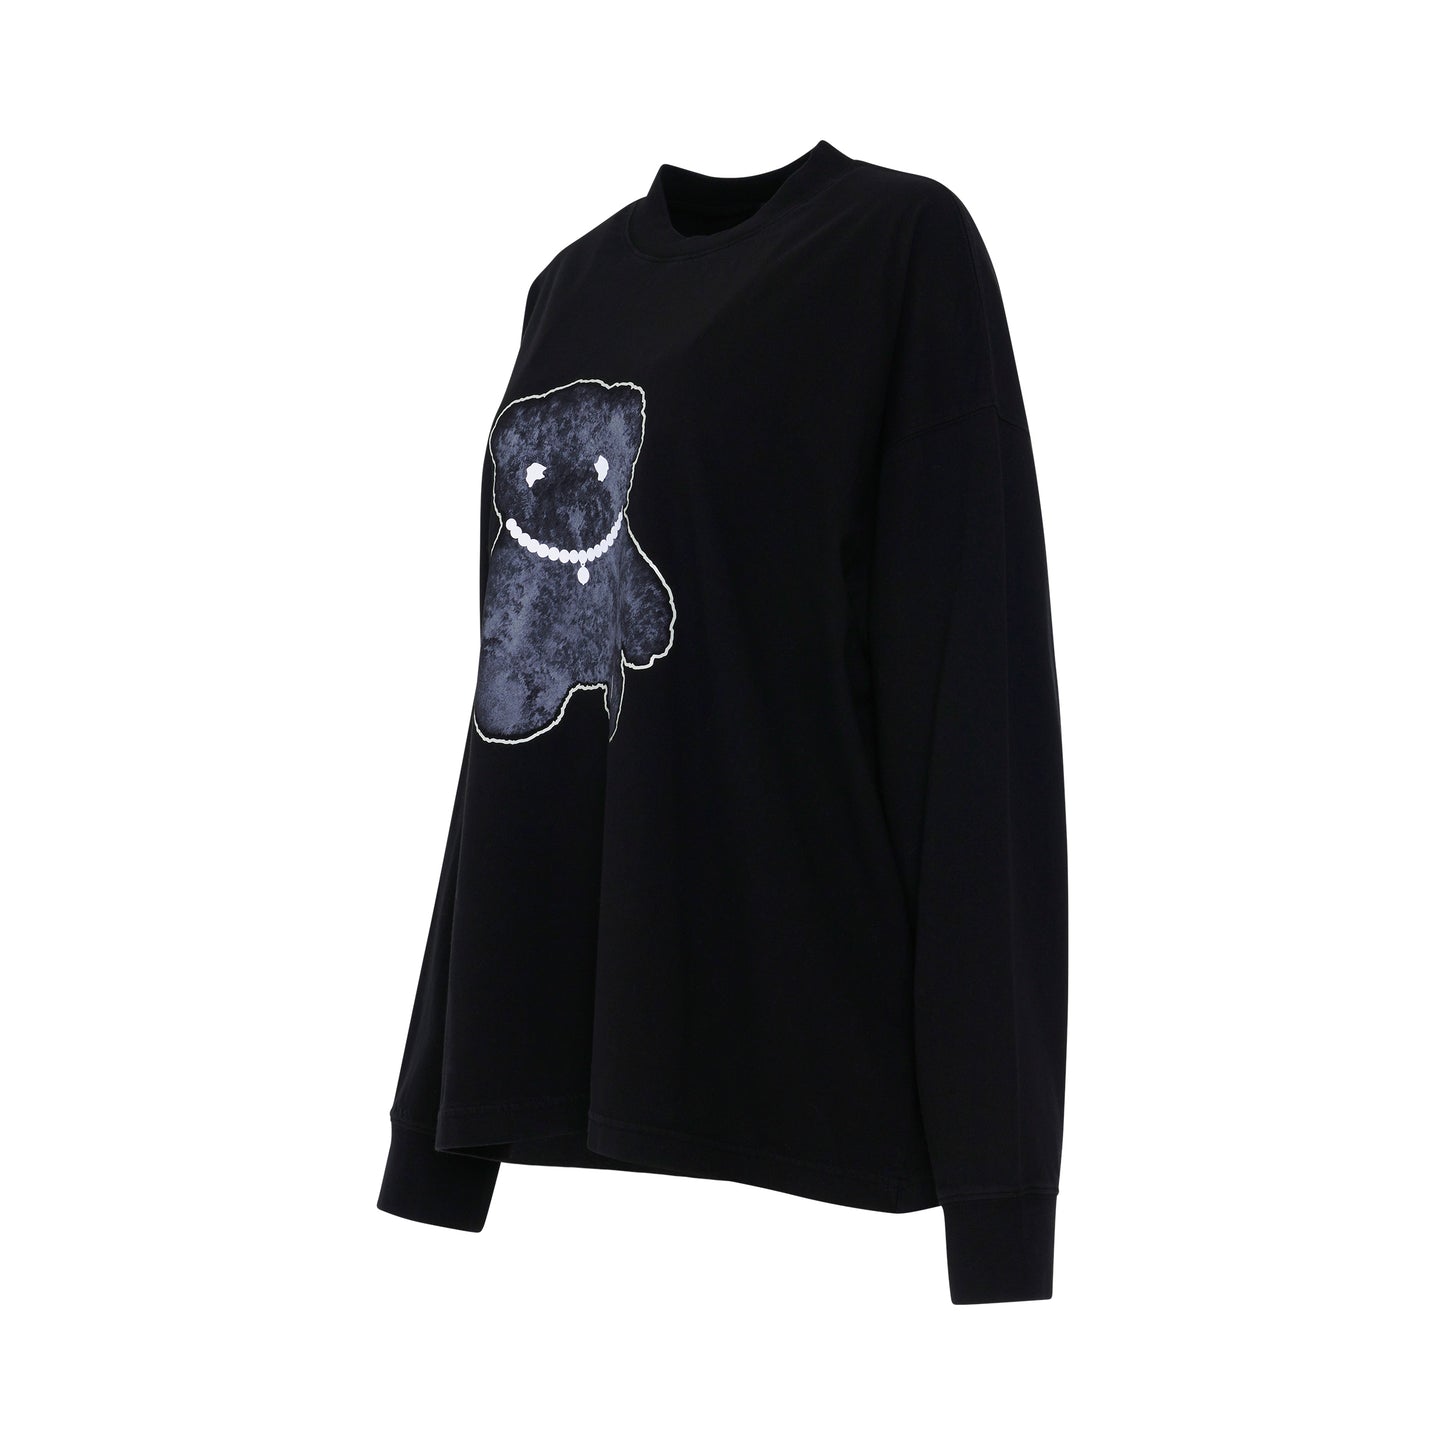 Pearl Necklace Teddy Long Sleeve T-Shirt in Black